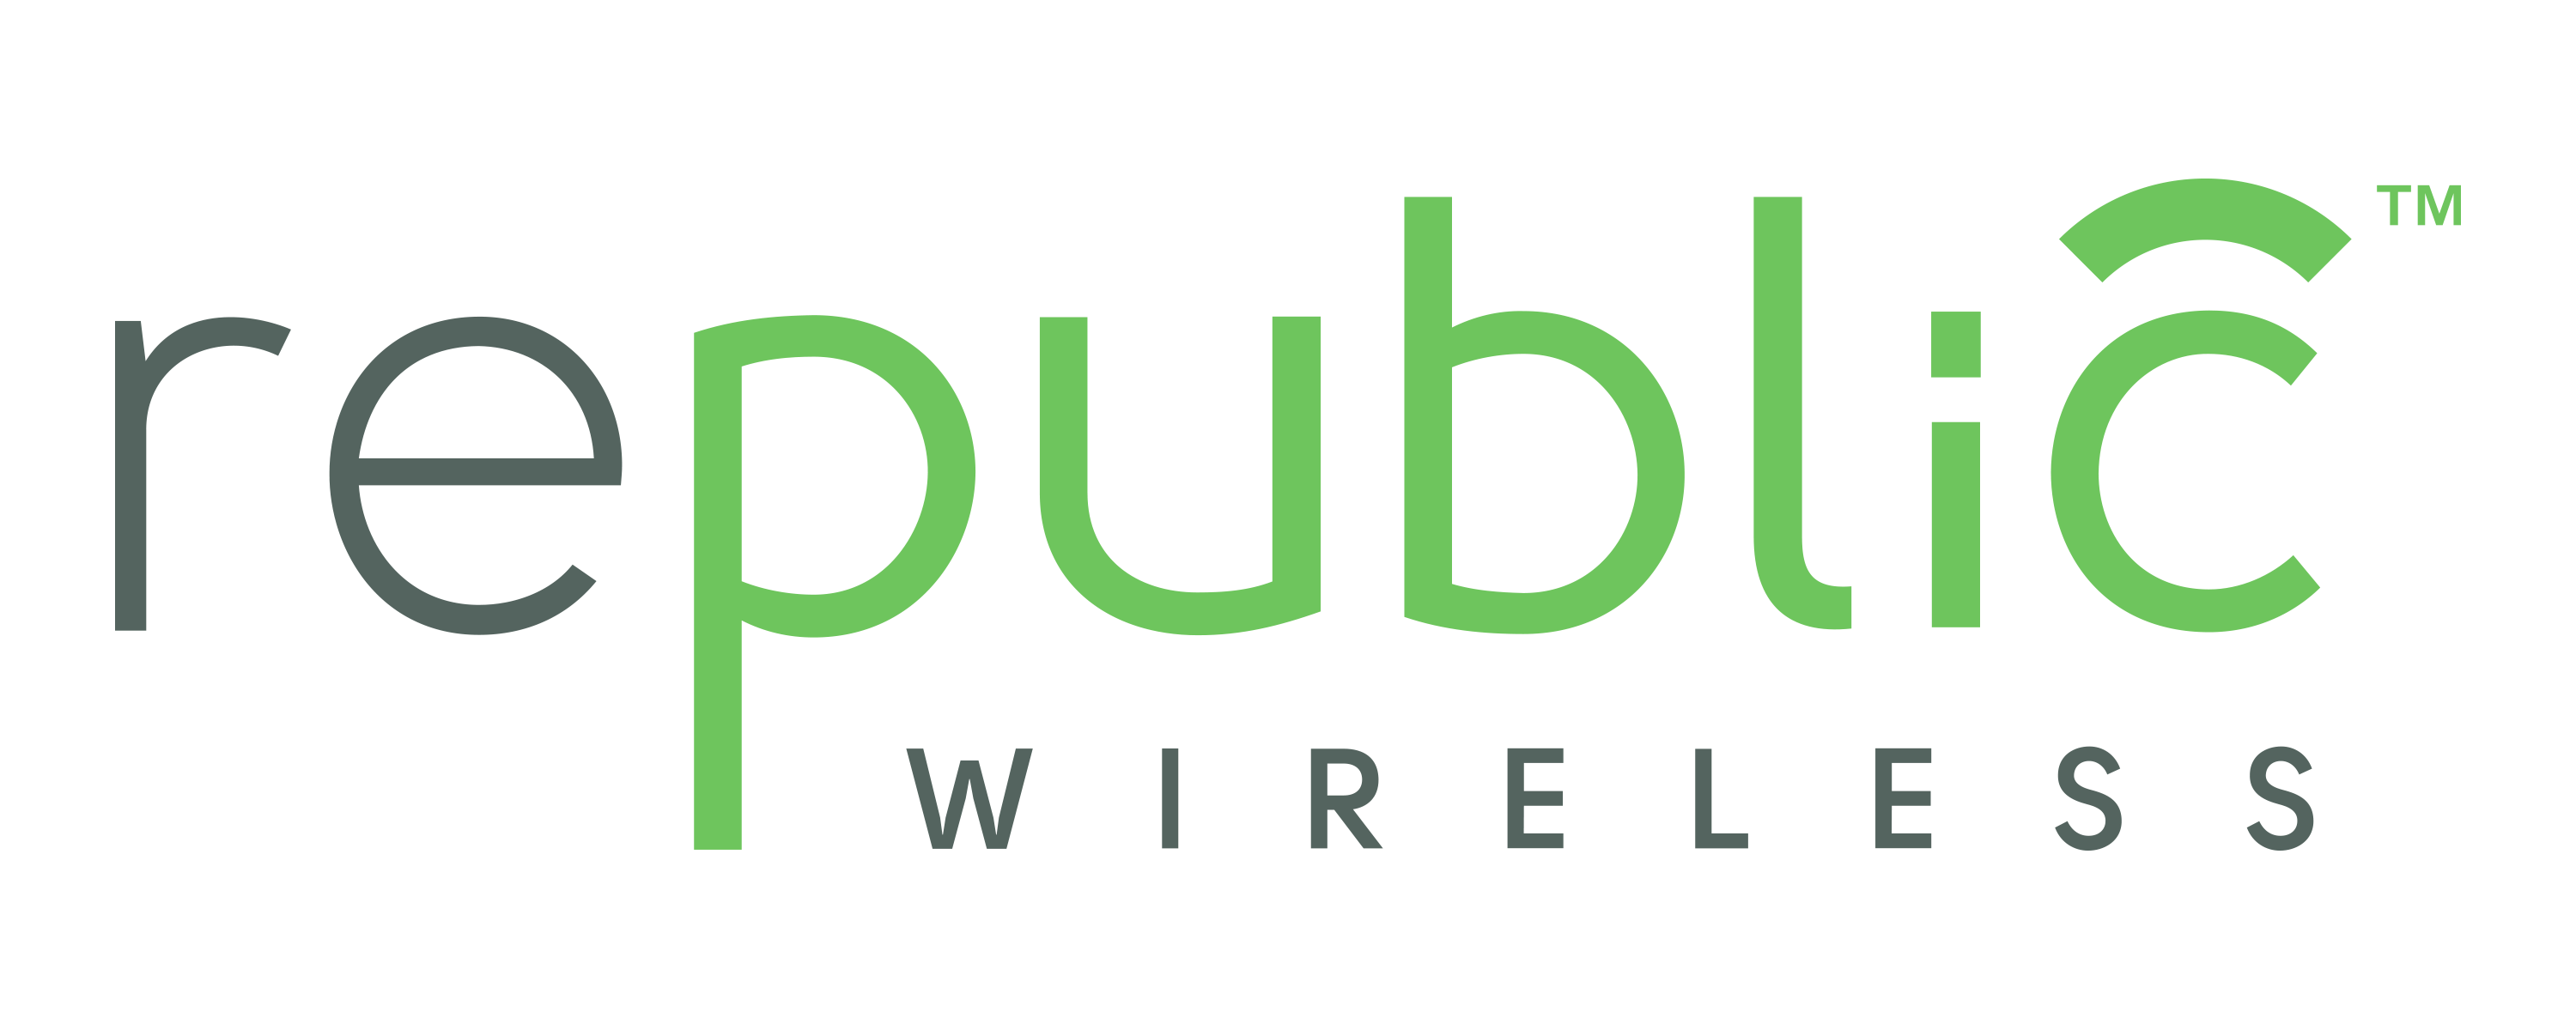 Bring Your Own Phone to Republic Wireless, the WiFi calling carrier saving Americans hundreds of dollars annually on smartphone service.